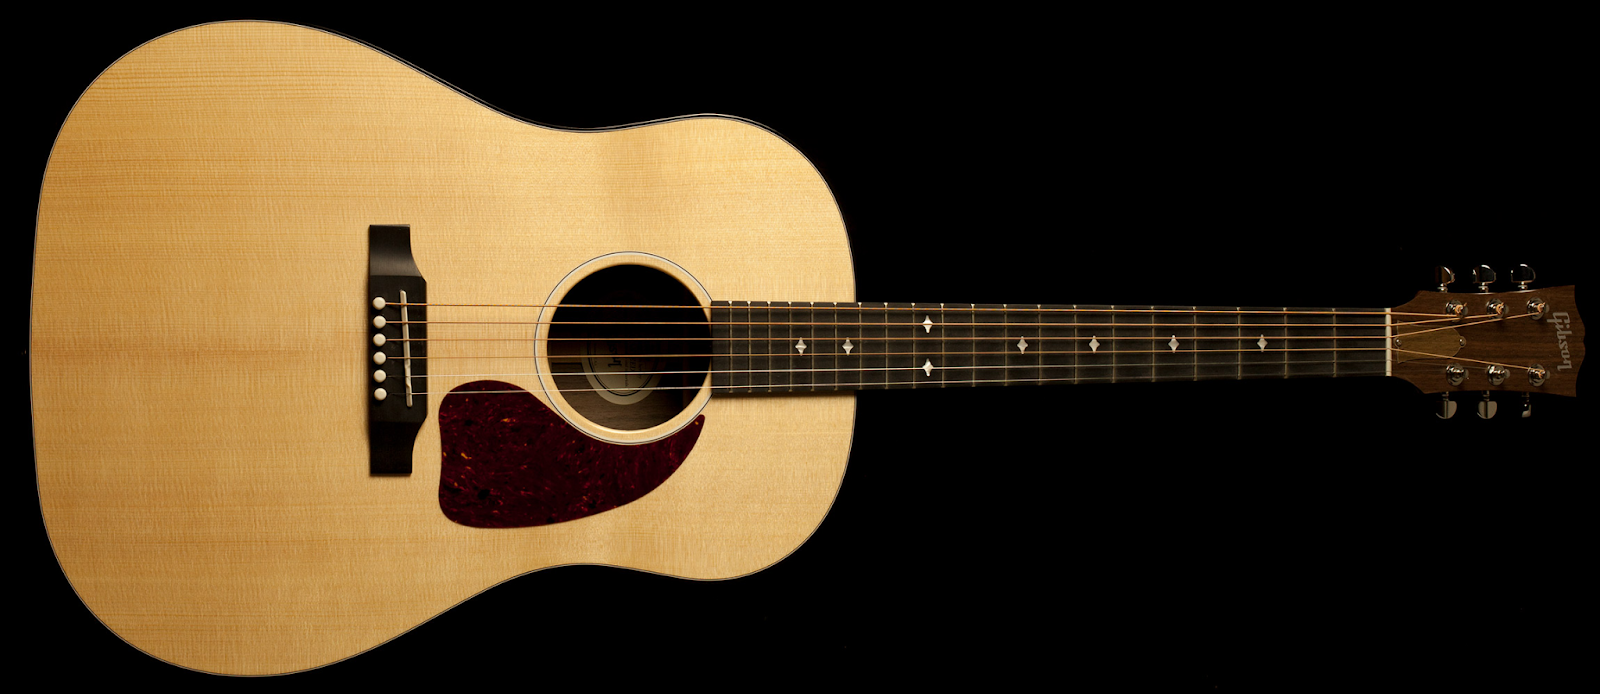 Gibson G-45 Standard - Best acoustic guitar for touring